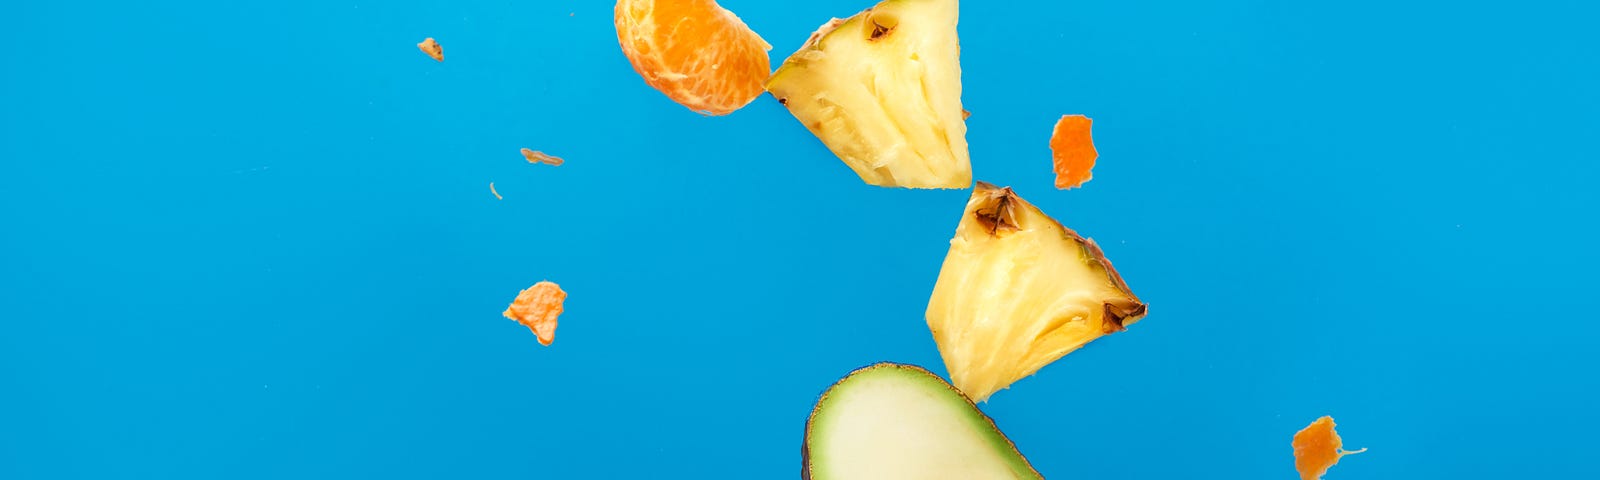 Avocado piece and other fruits rise up off of a fork, flying through the air against a light blue background.